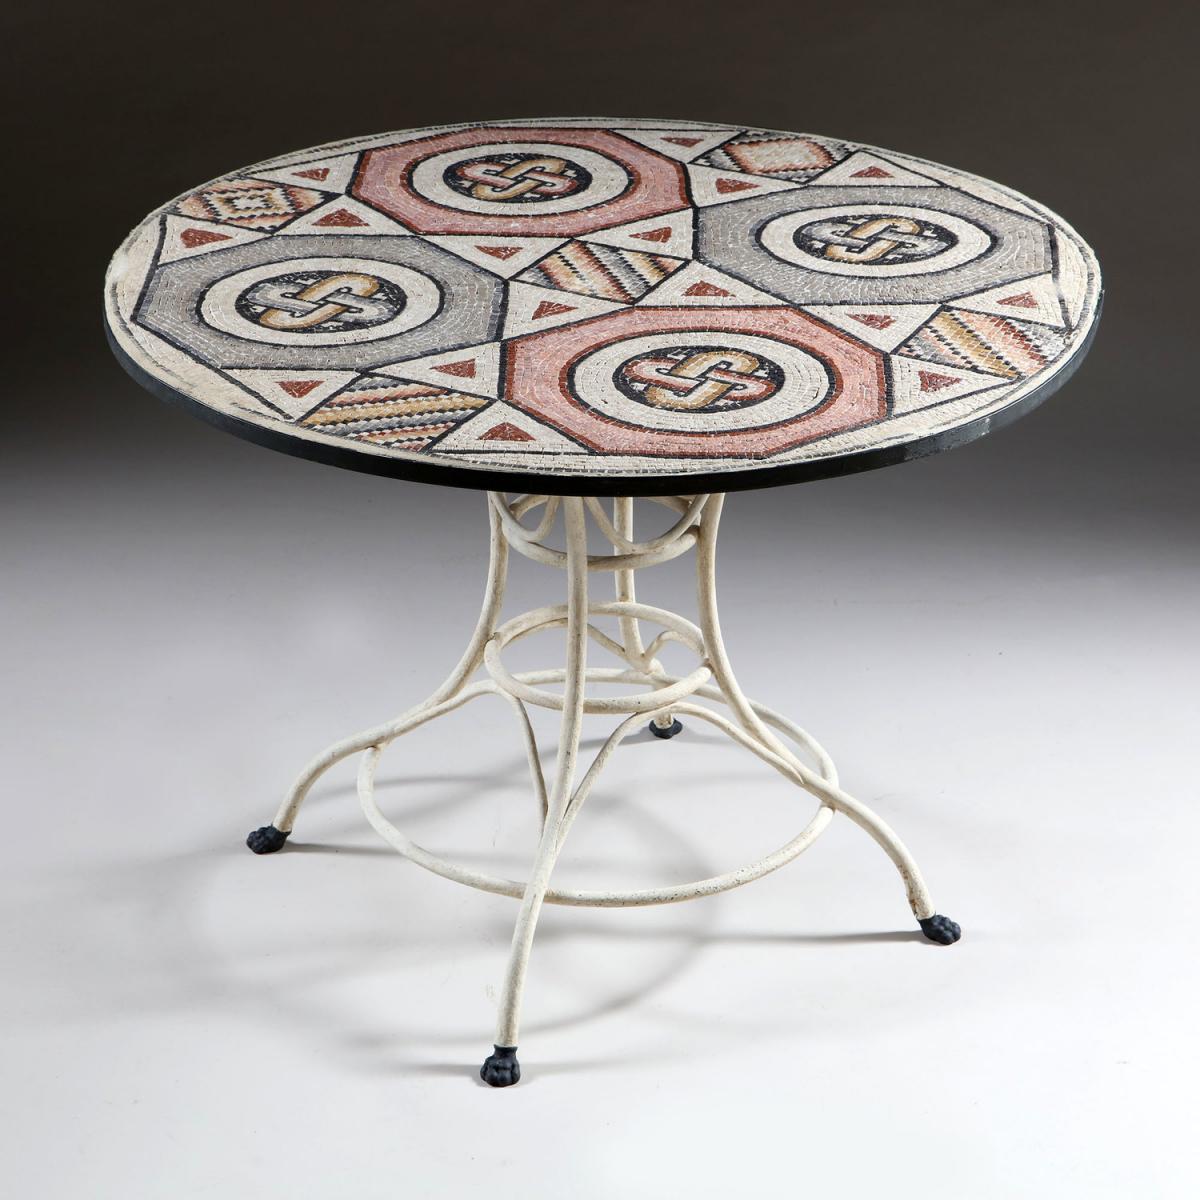 An Unusual Mosaic Topped Centre Table